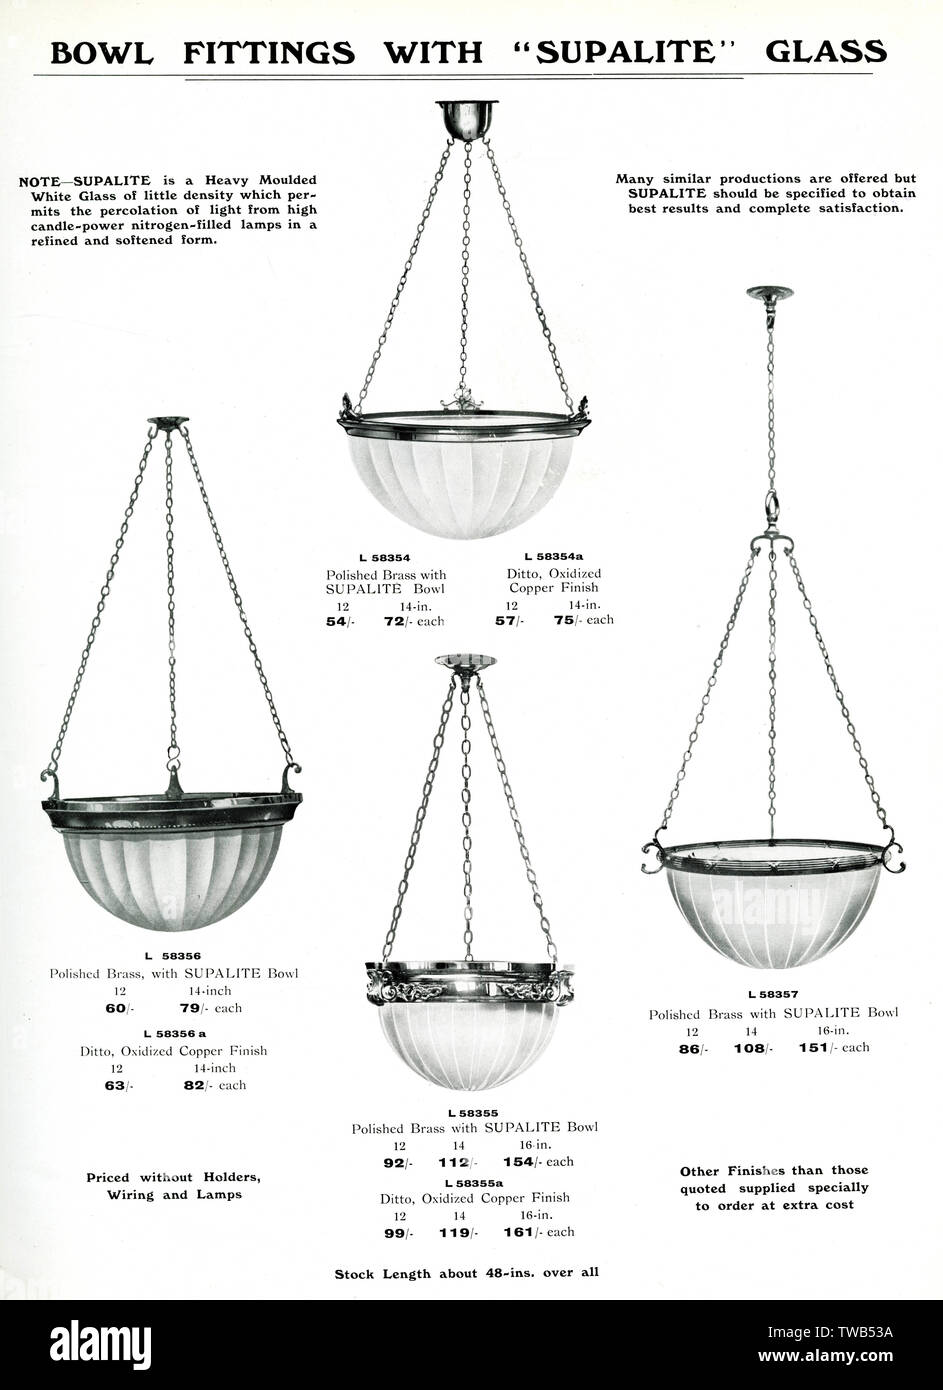 Electric Light Fixtures catalogue, Supalite Bowl Fittings Stock Photo